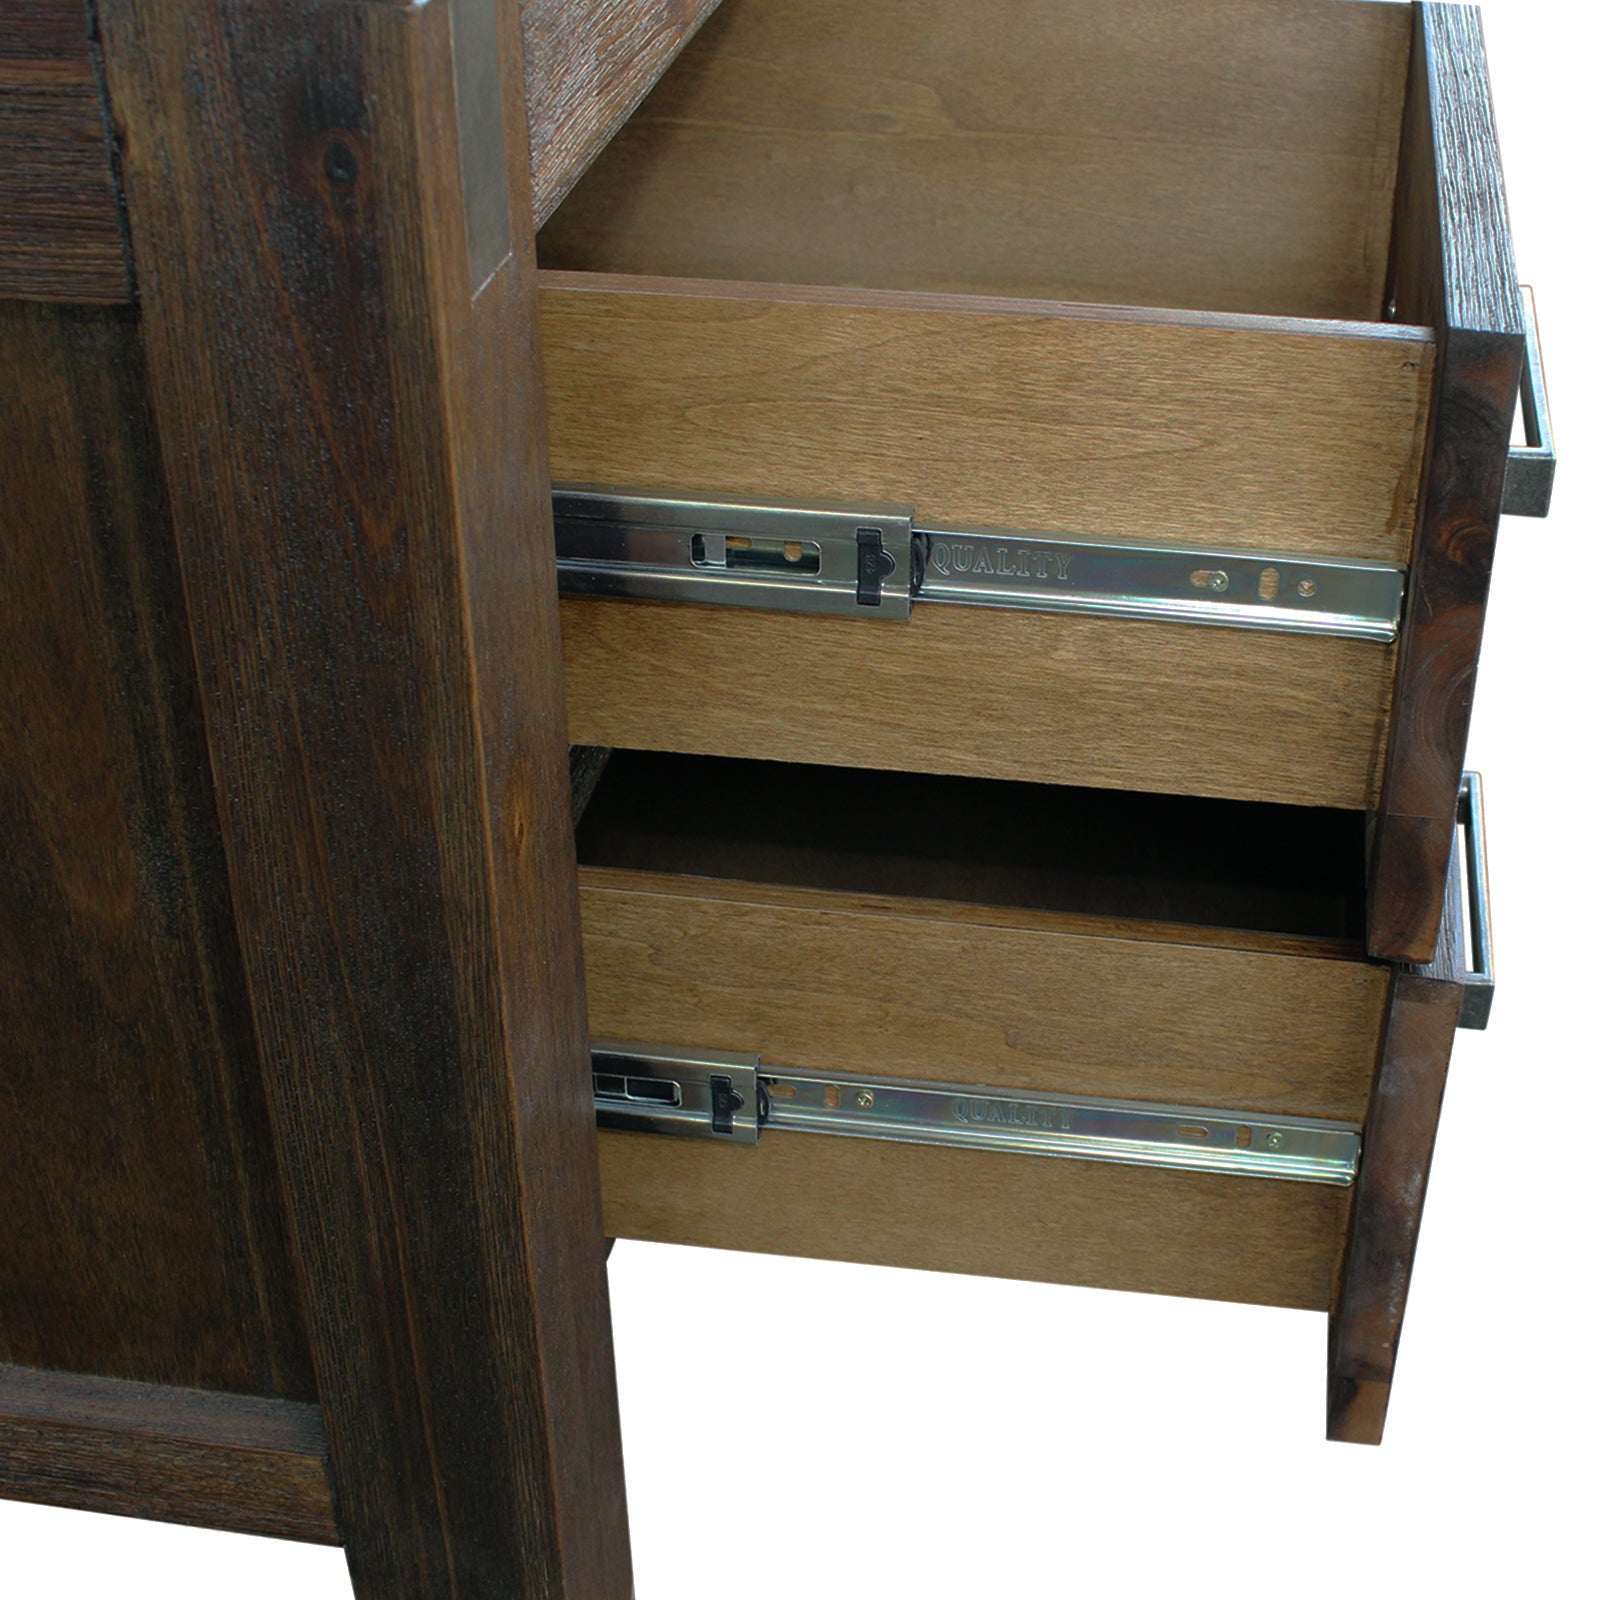 Nowra 2 Drawer Bedside Table